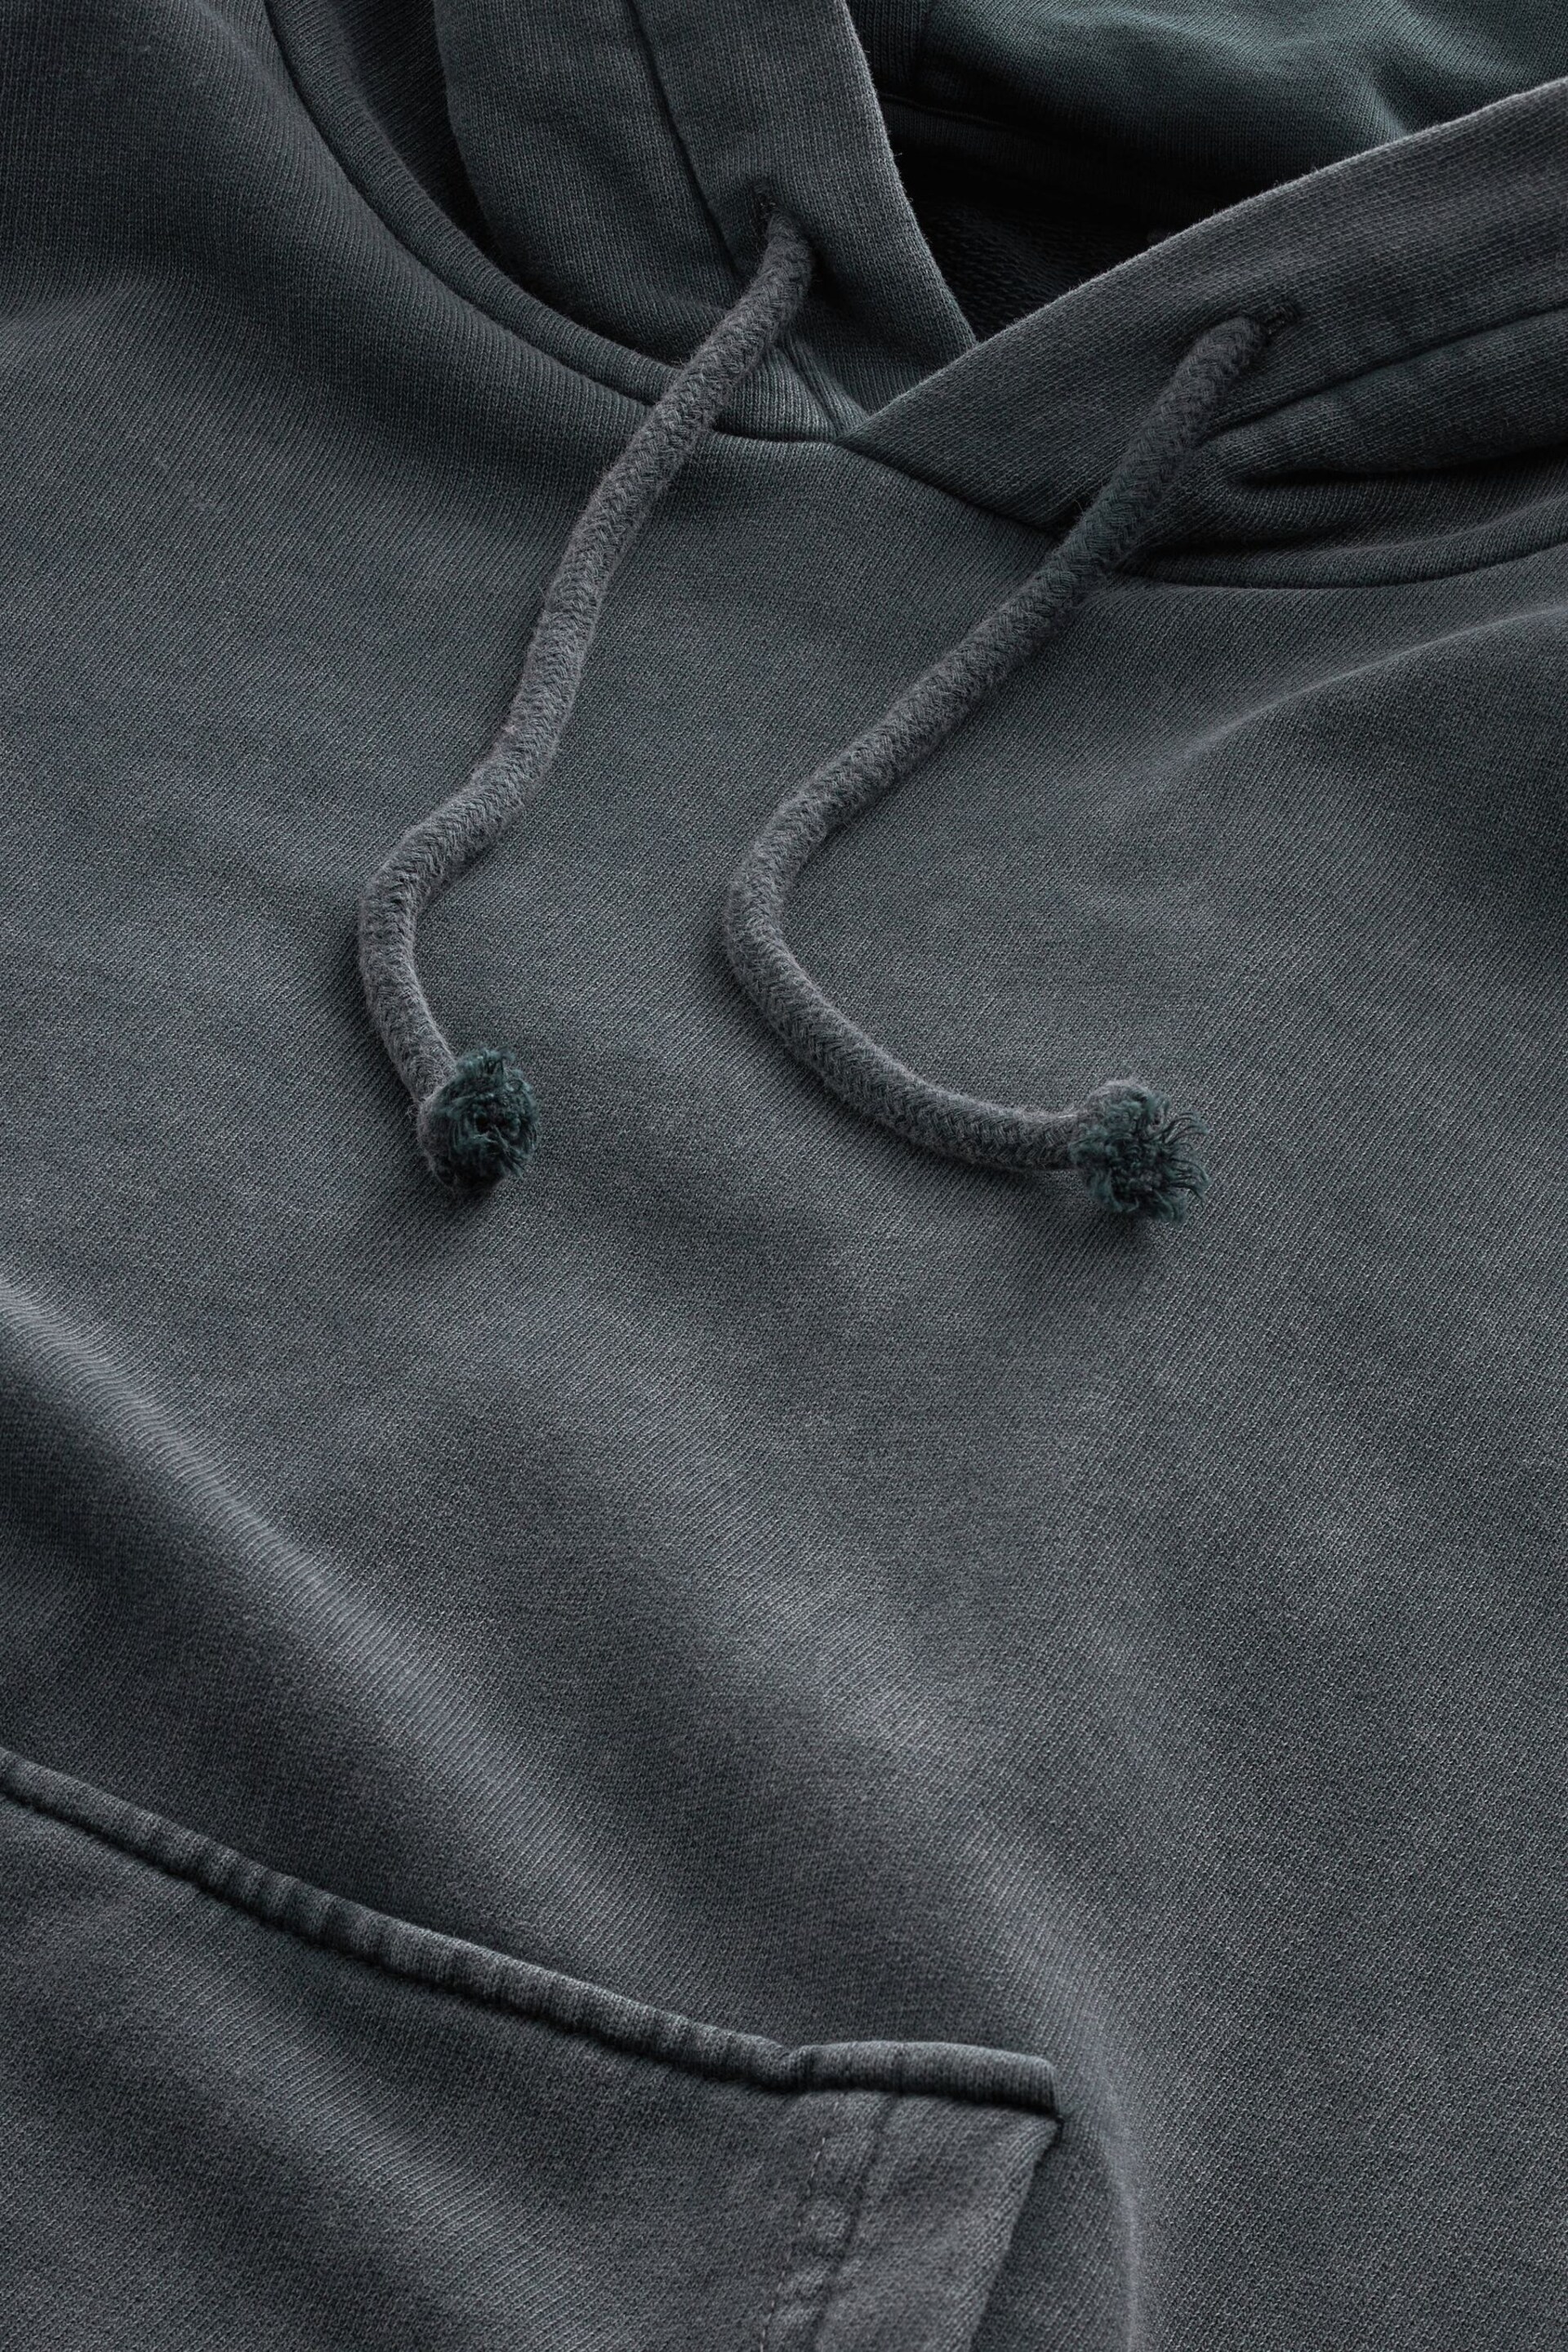 Charcoal Grey Garment Washed Hoodie - Image 7 of 8